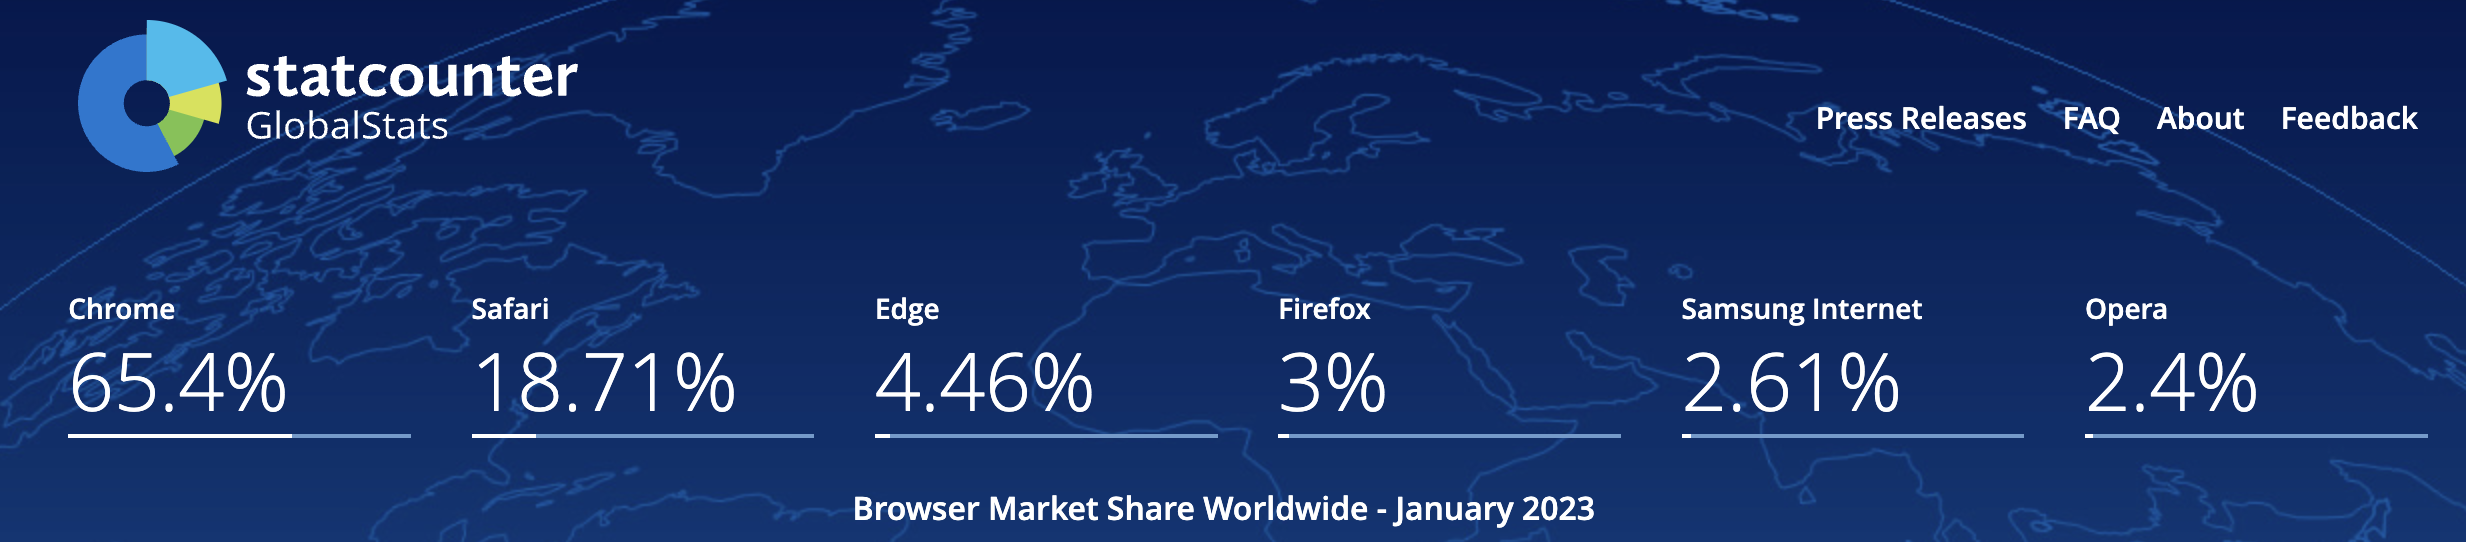 Browser Market Share in 2023